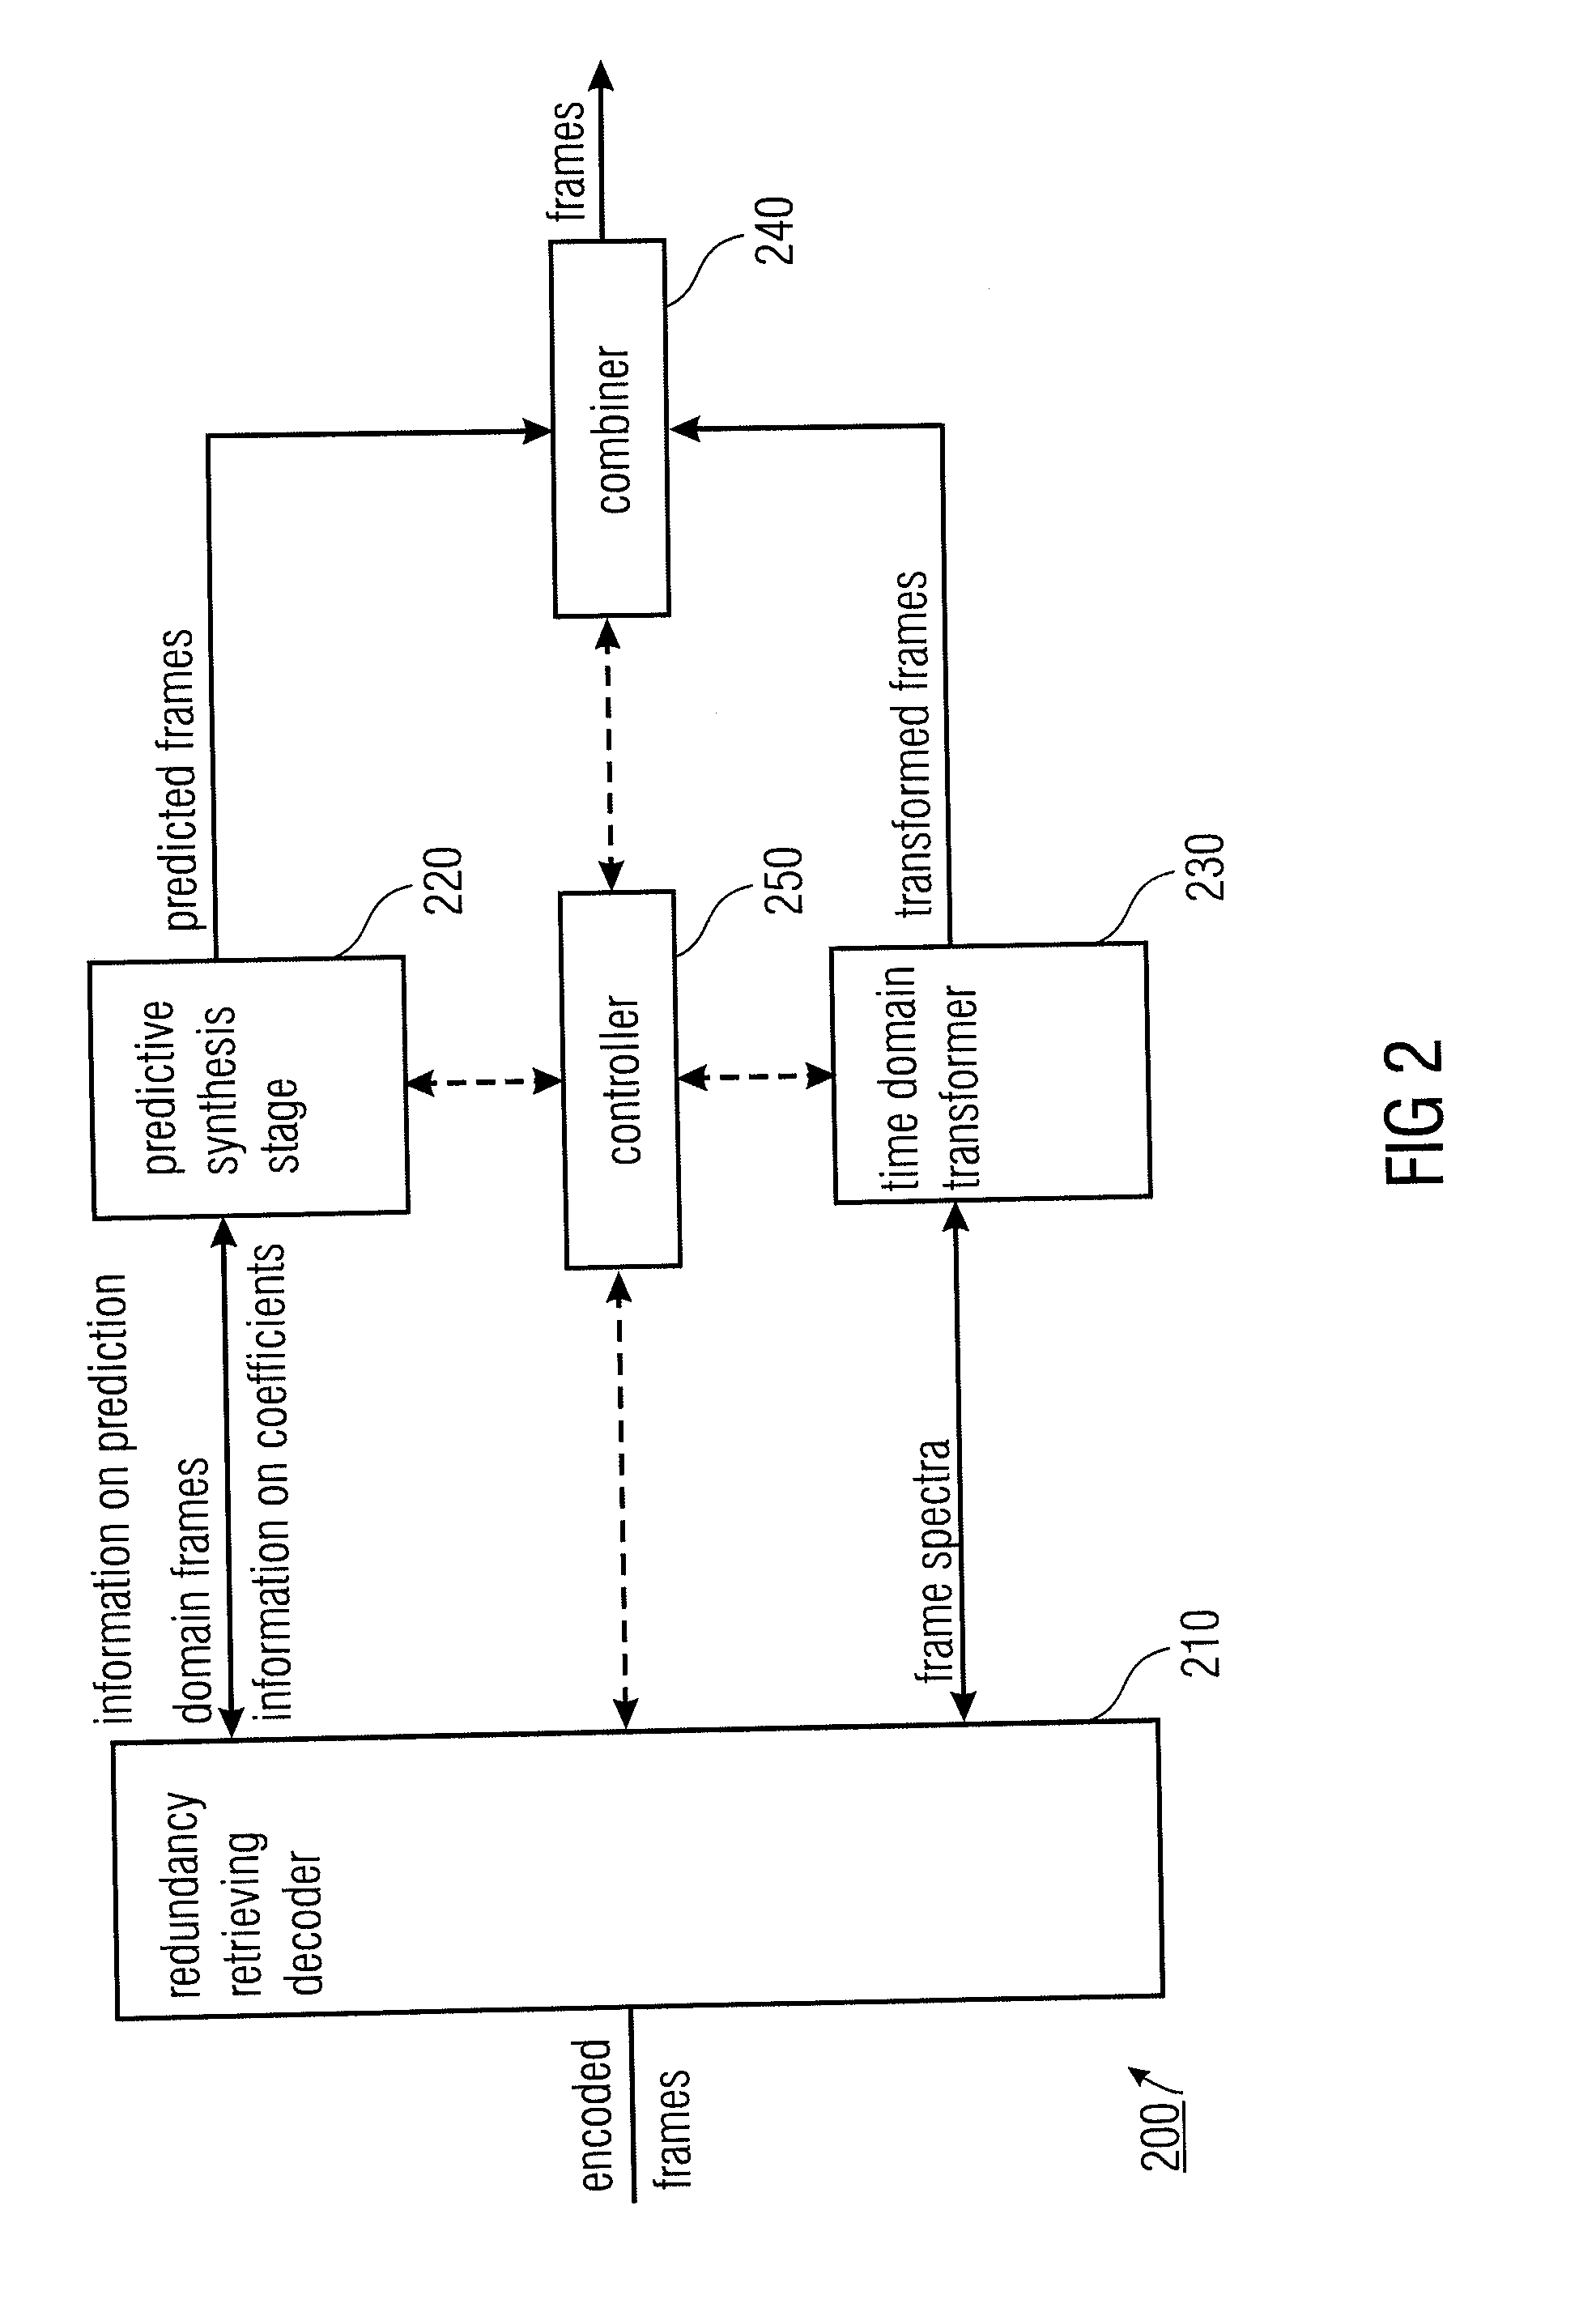 Audio Encoder and Decoder for Encoding Frames of Sampled Audio Signals